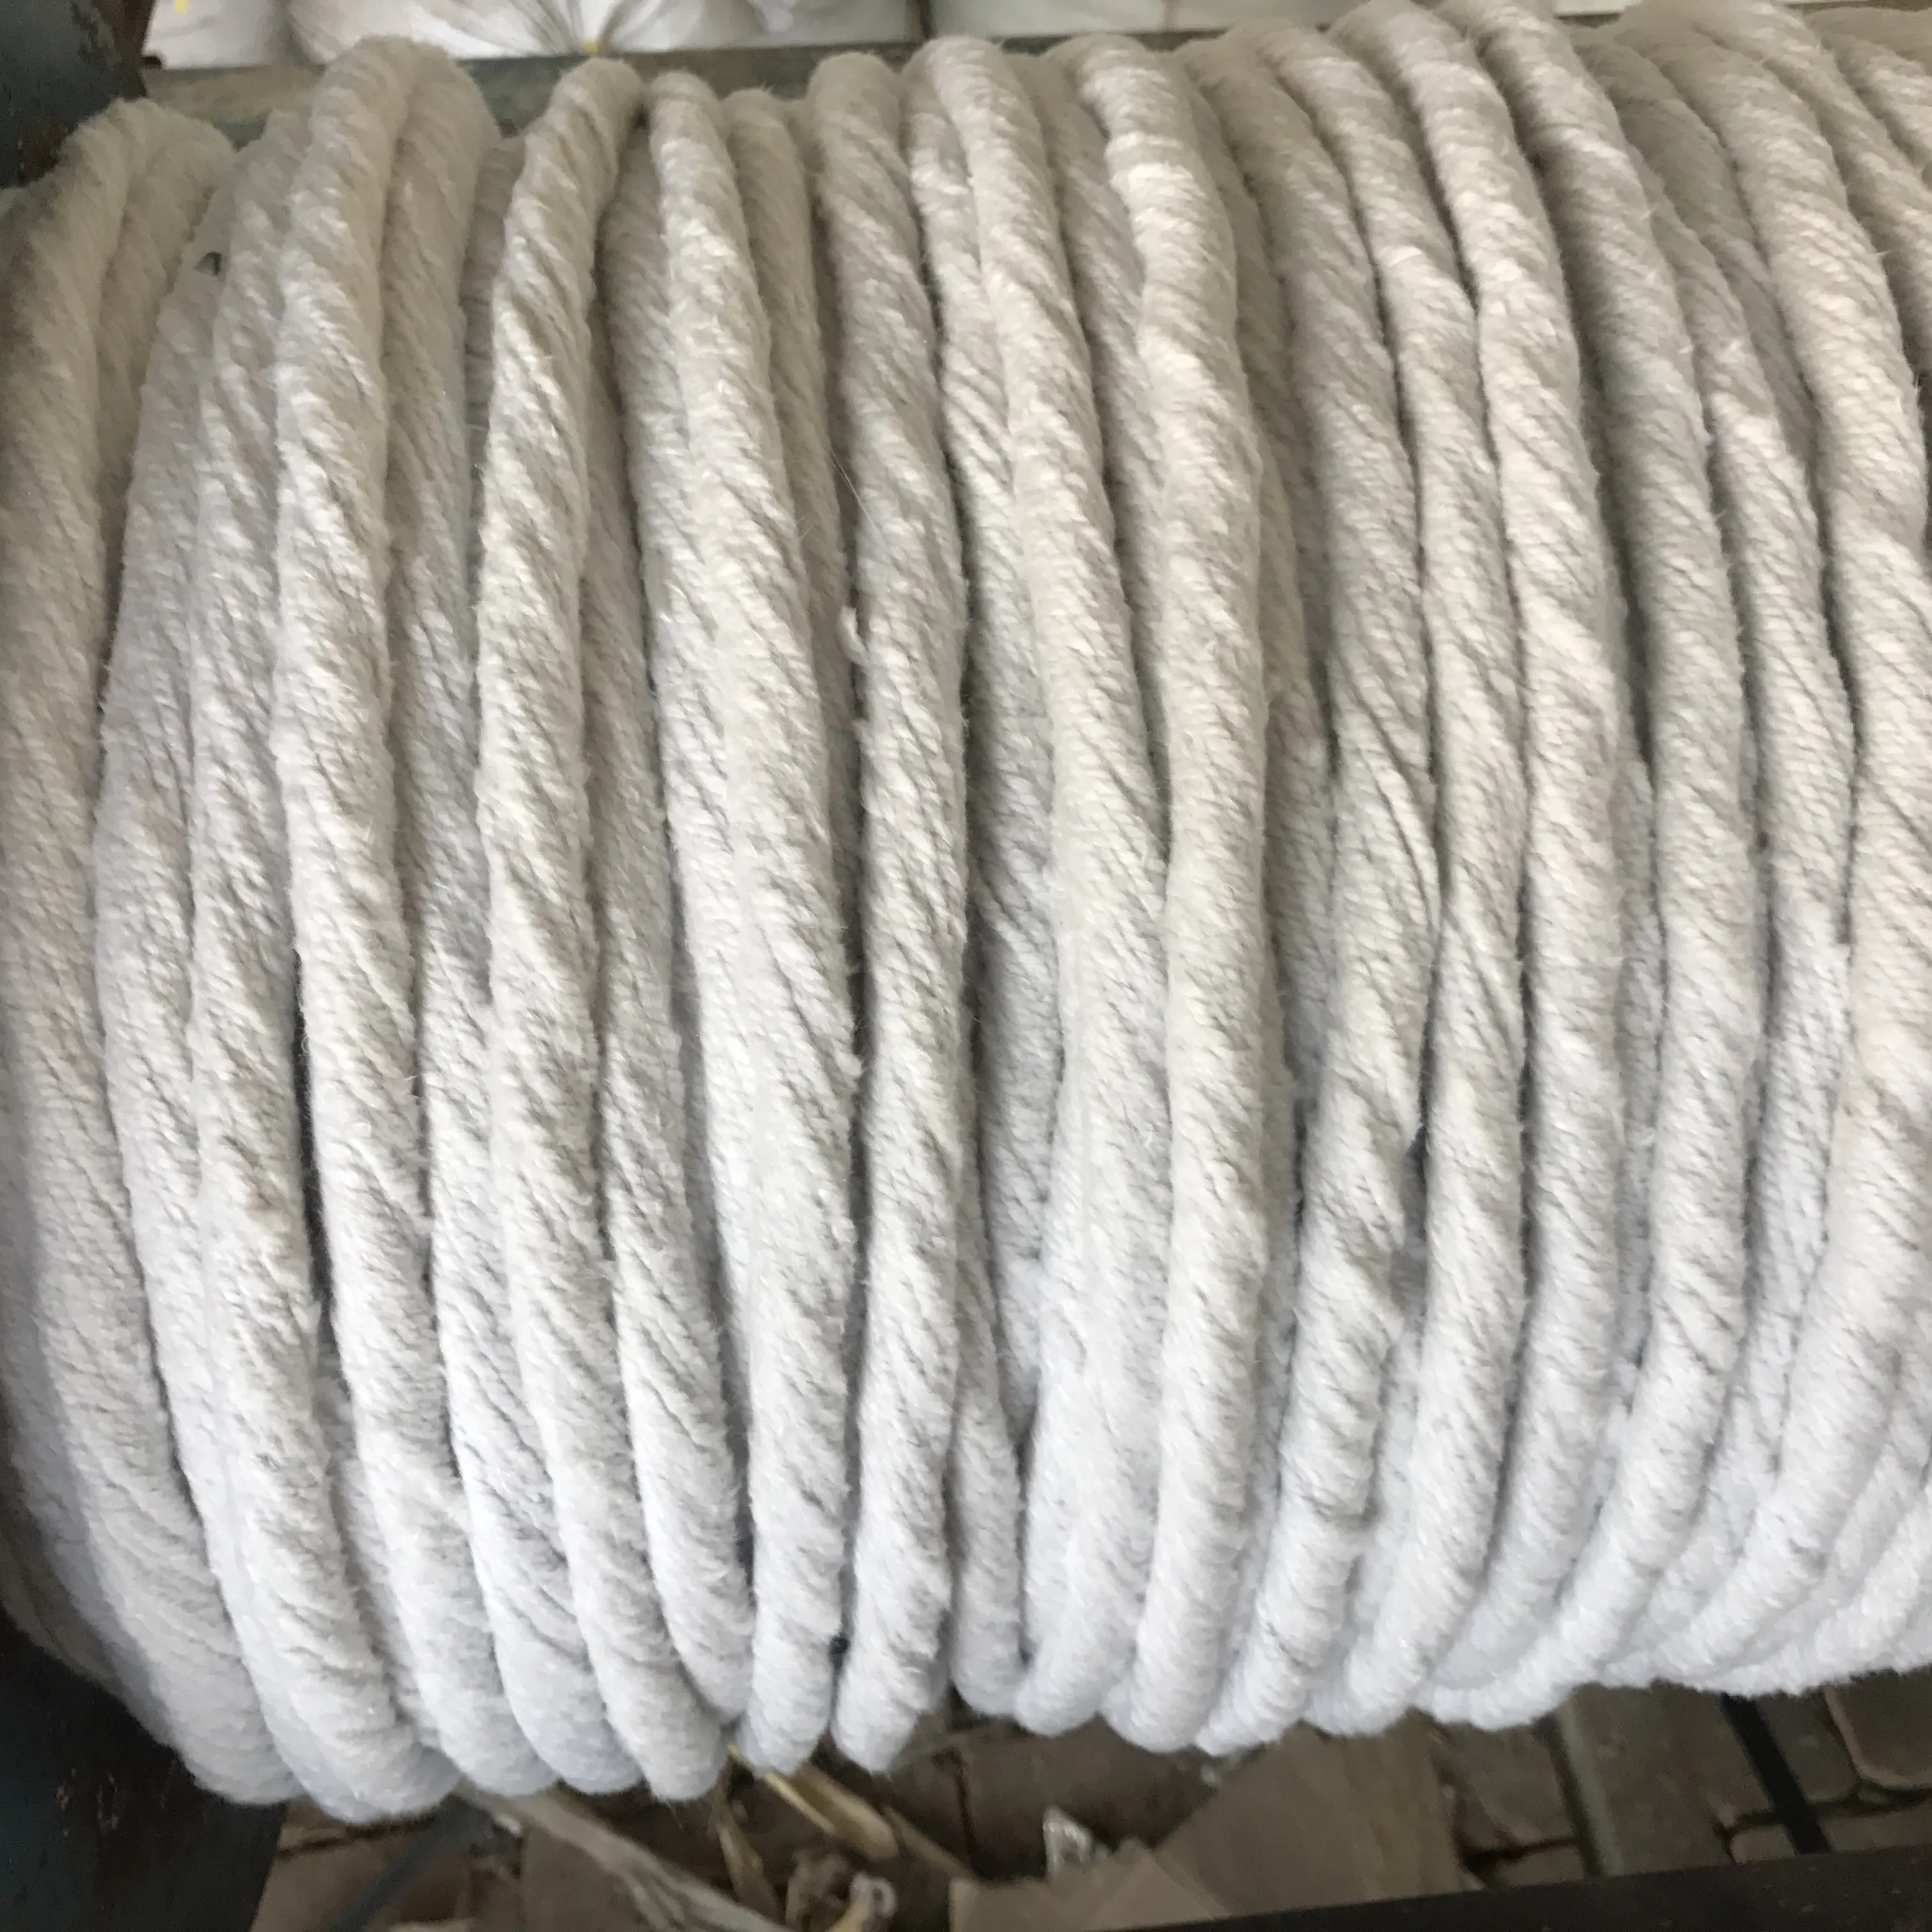 Refractory Ceramic Fiber Rope 1260 Round Twisted Braided Ceramic Fibre Ropes Fireproof Sealing Gasket